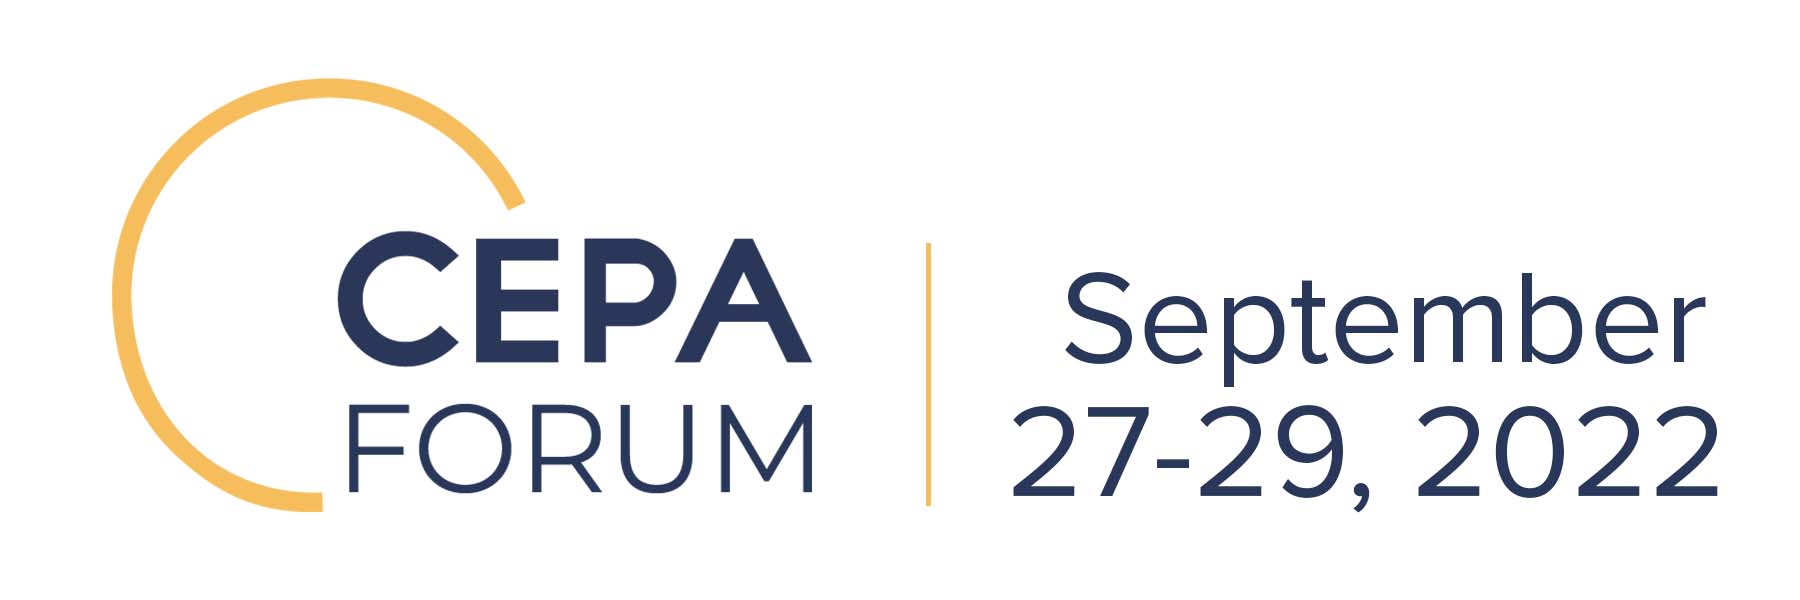 CEPA Forum Email Banner